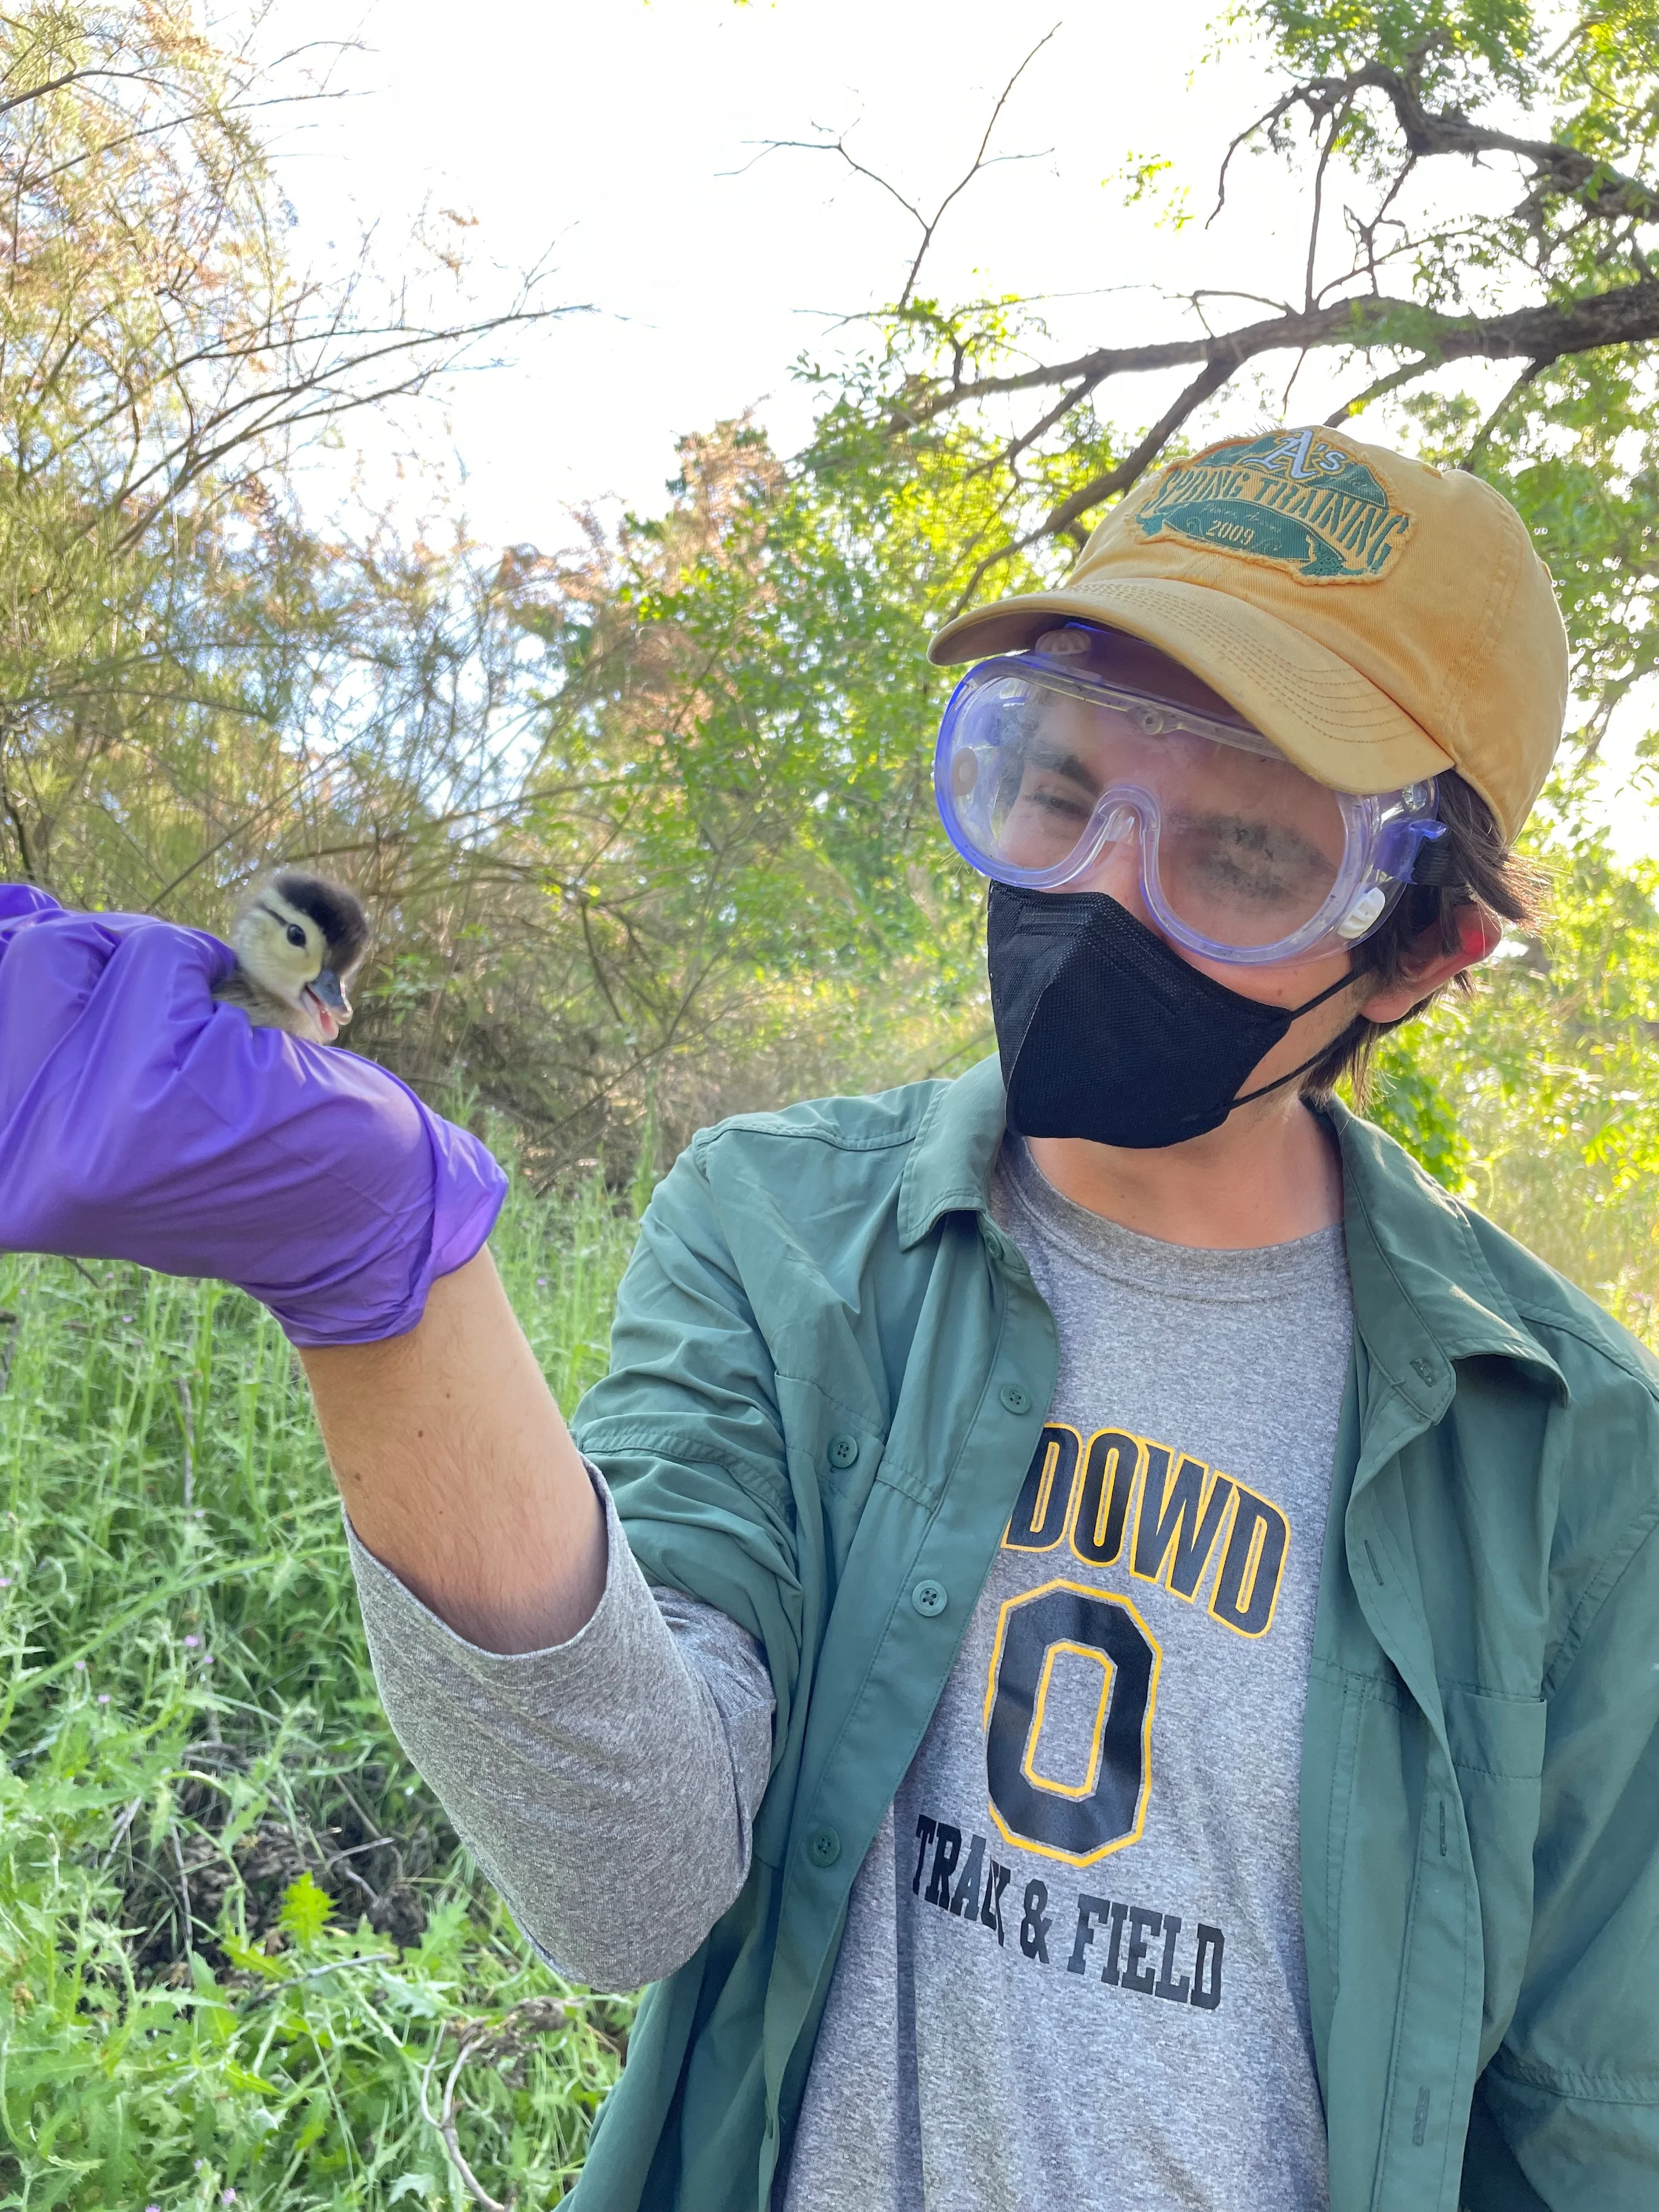 Joe Sweeney holds a baby wood duck in preparation for measurements and tagging. (Courtesy Joe Sweeney)